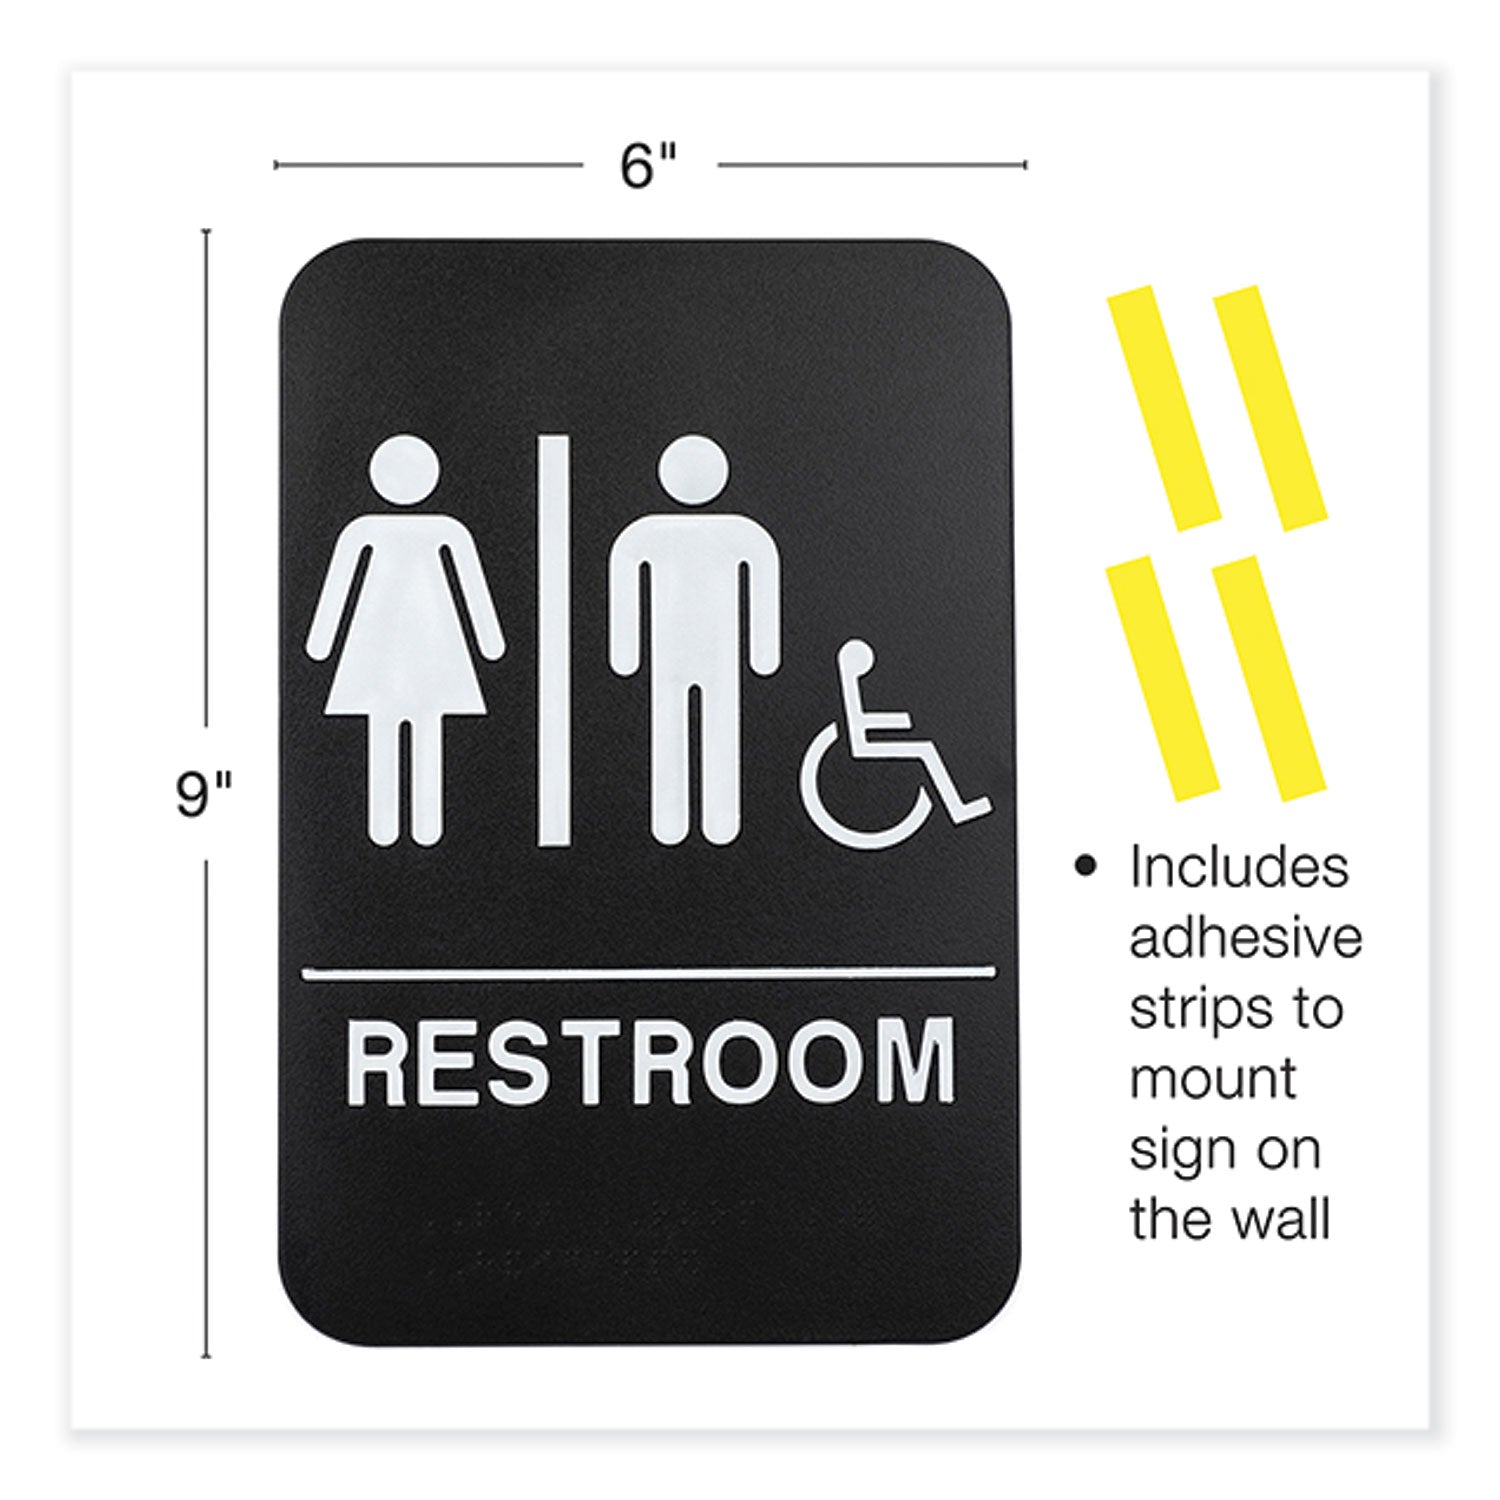 indoor-outdoor-restroom-sign-with-braille-text-and-wheelchair-6-x-9-black-face-white-graphics-3-pack_exohd0036s - 2